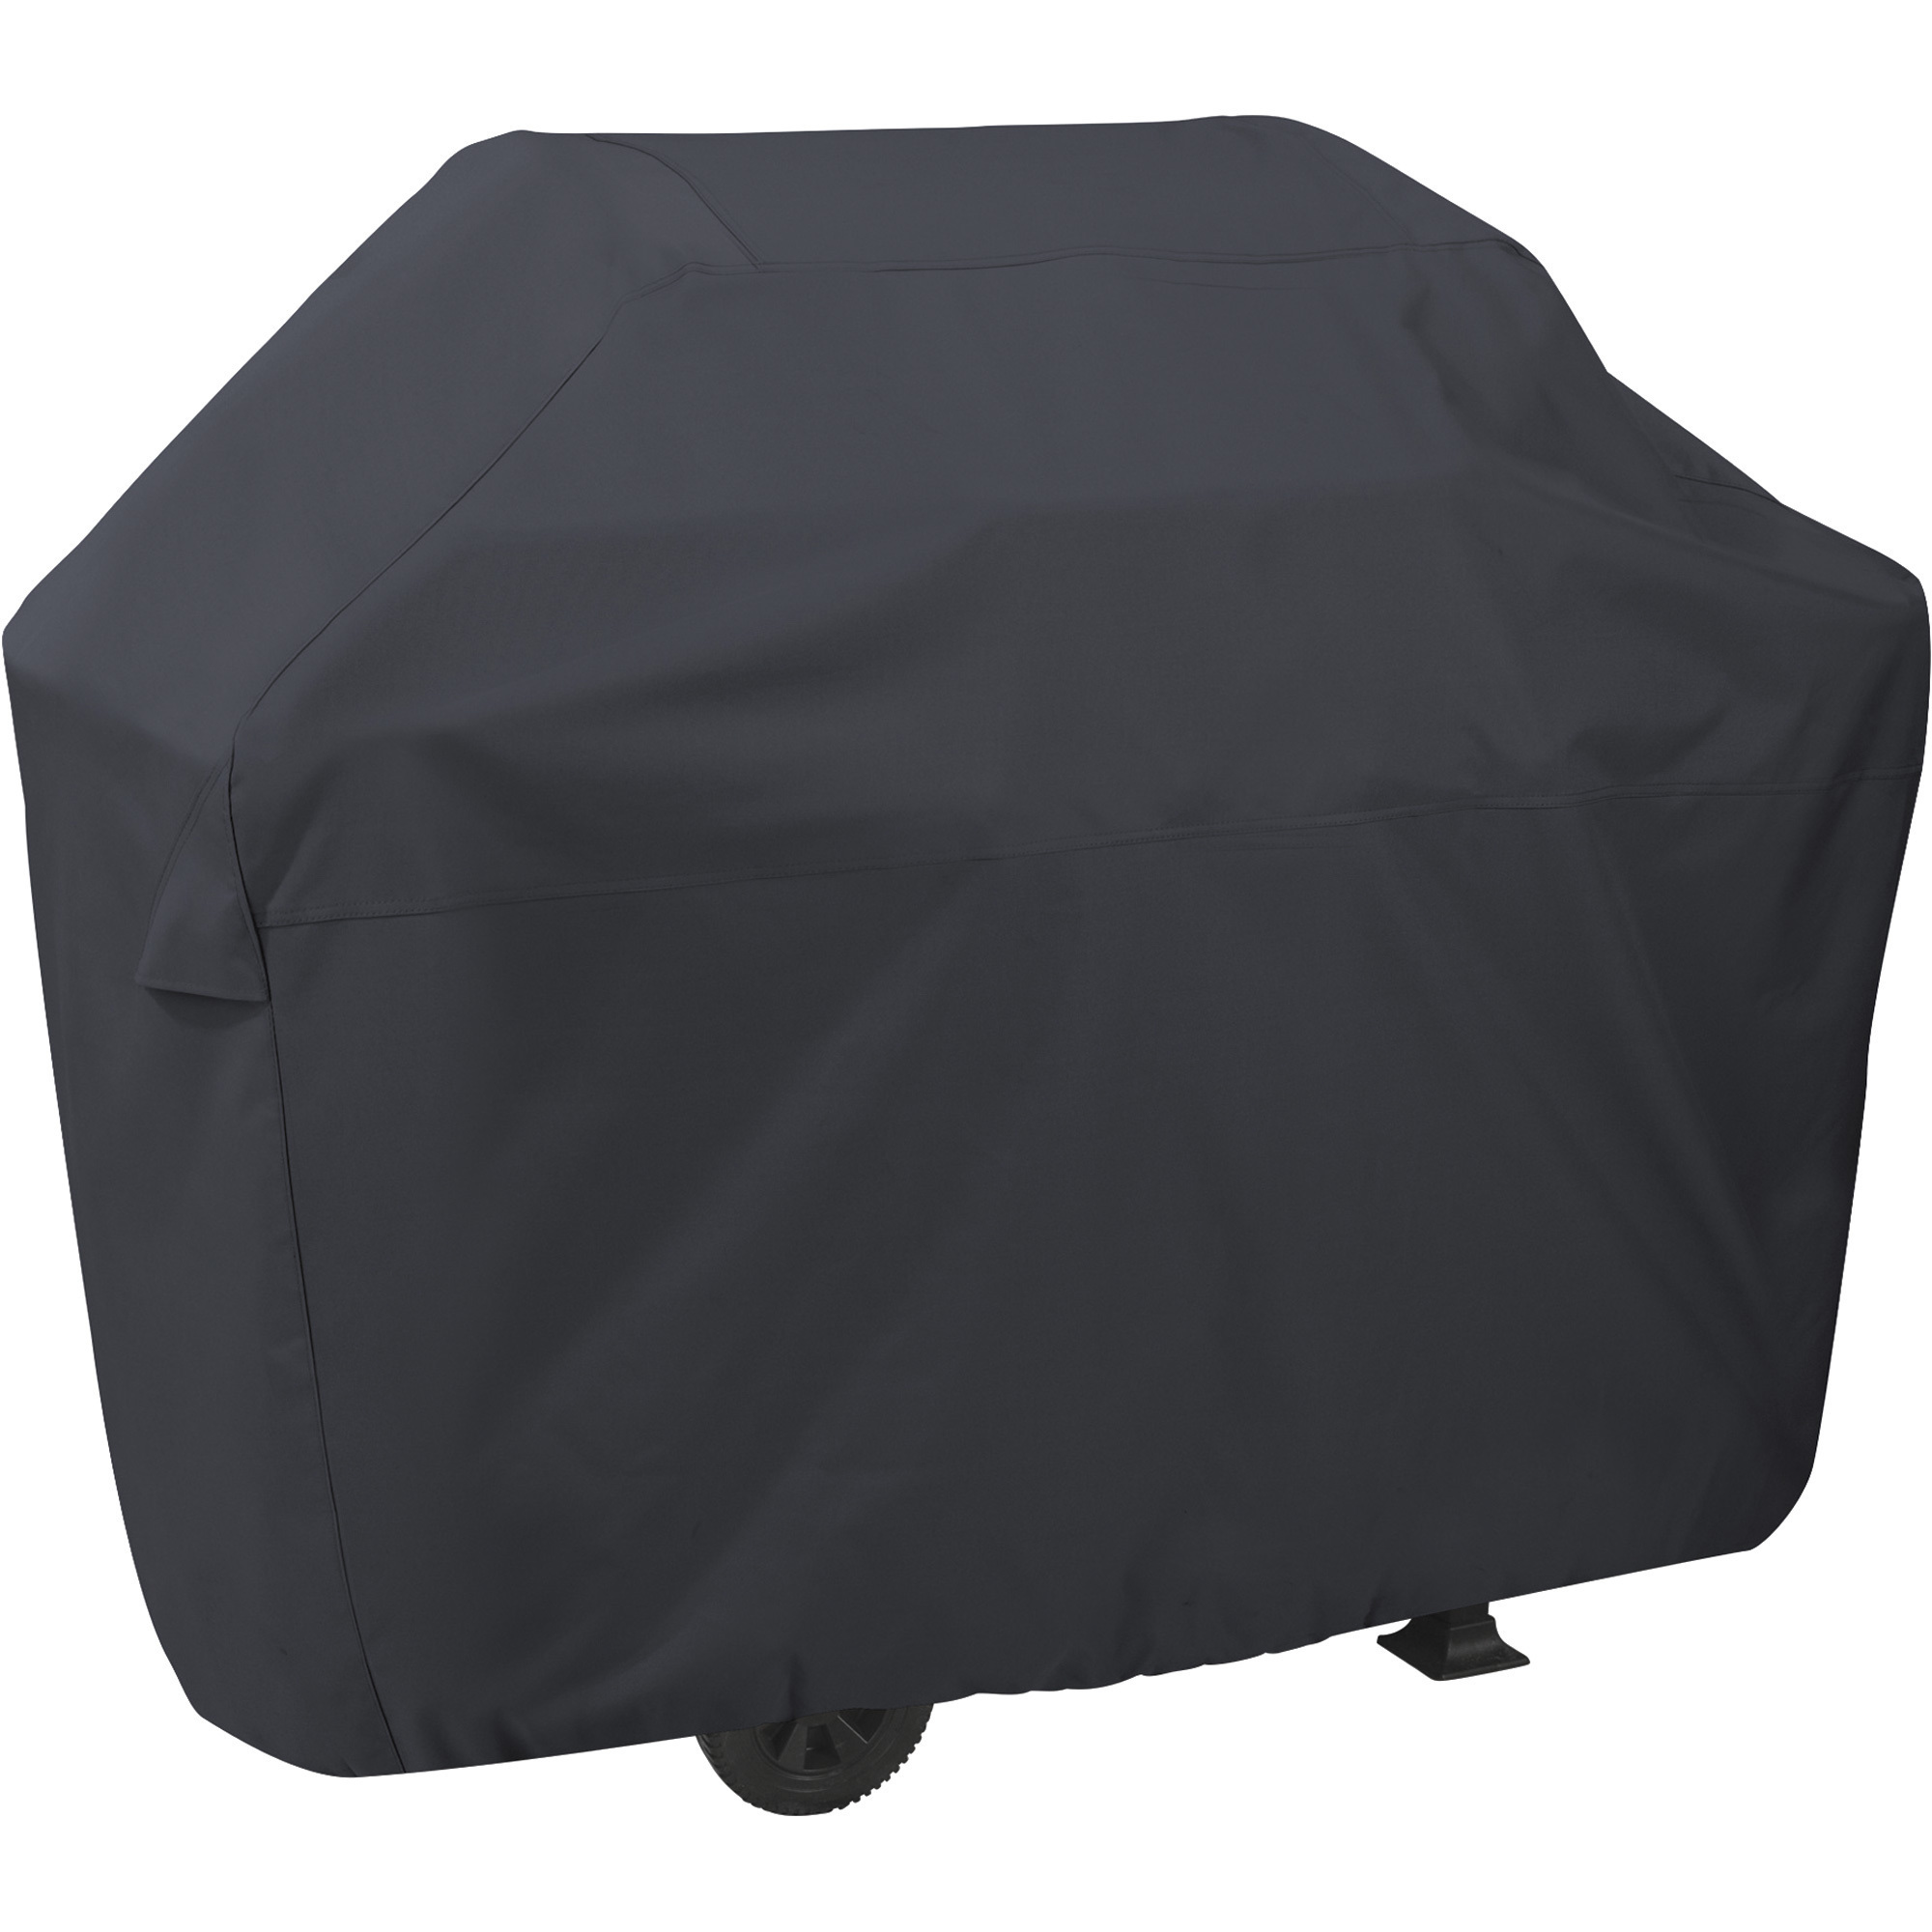 Classic Accessories Grill Cover, Large, Black, Fits Grills up to 64Inch L x 26Inch D x 48Inch H, Model 55-307-040401-00